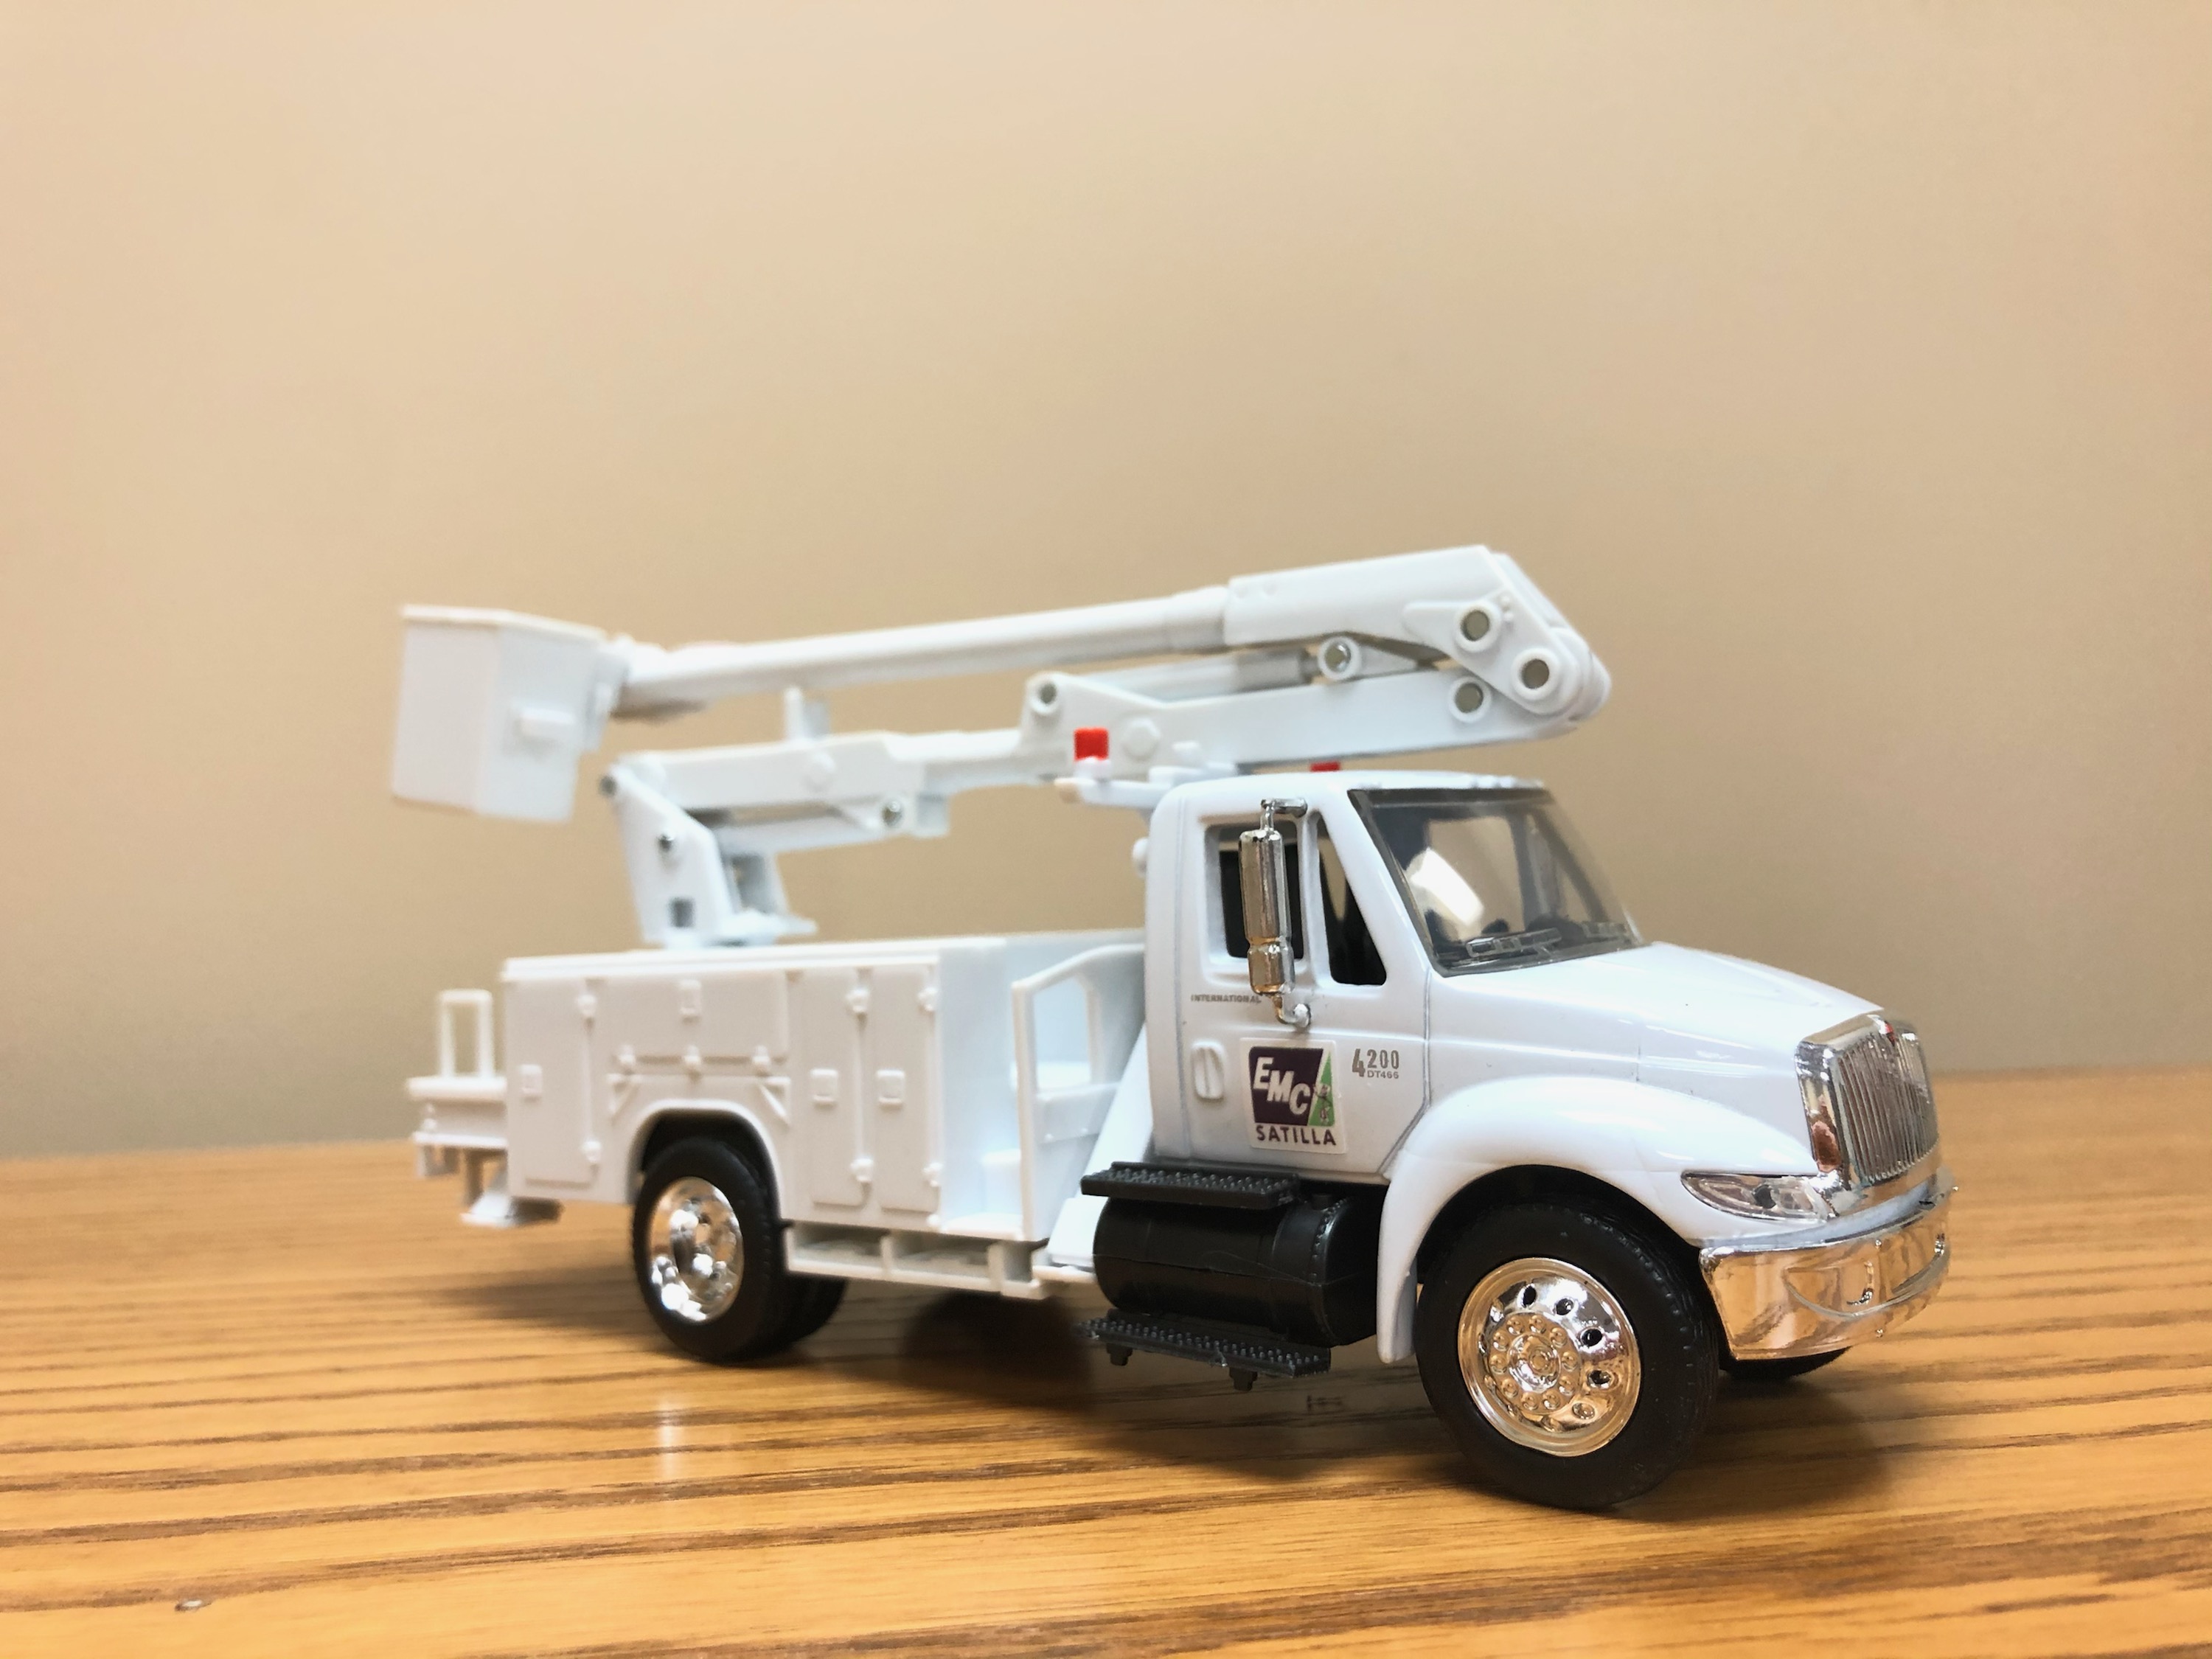 A small, white toy utilities truck with the Satilla EMC logo on it